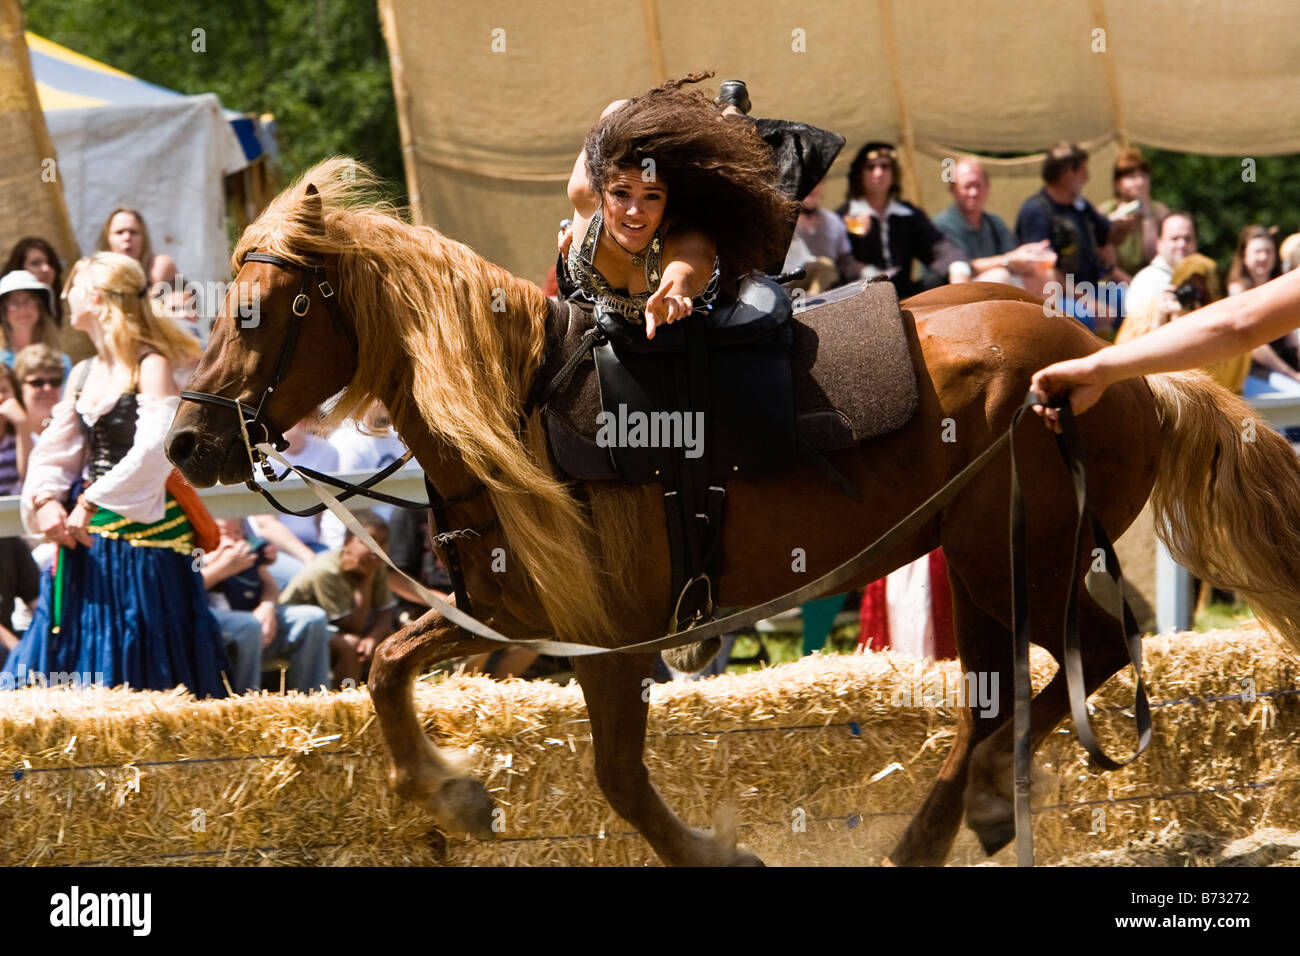 Image of a woman riding laying across the back of a horse pointing directly at the camera Stock Photo